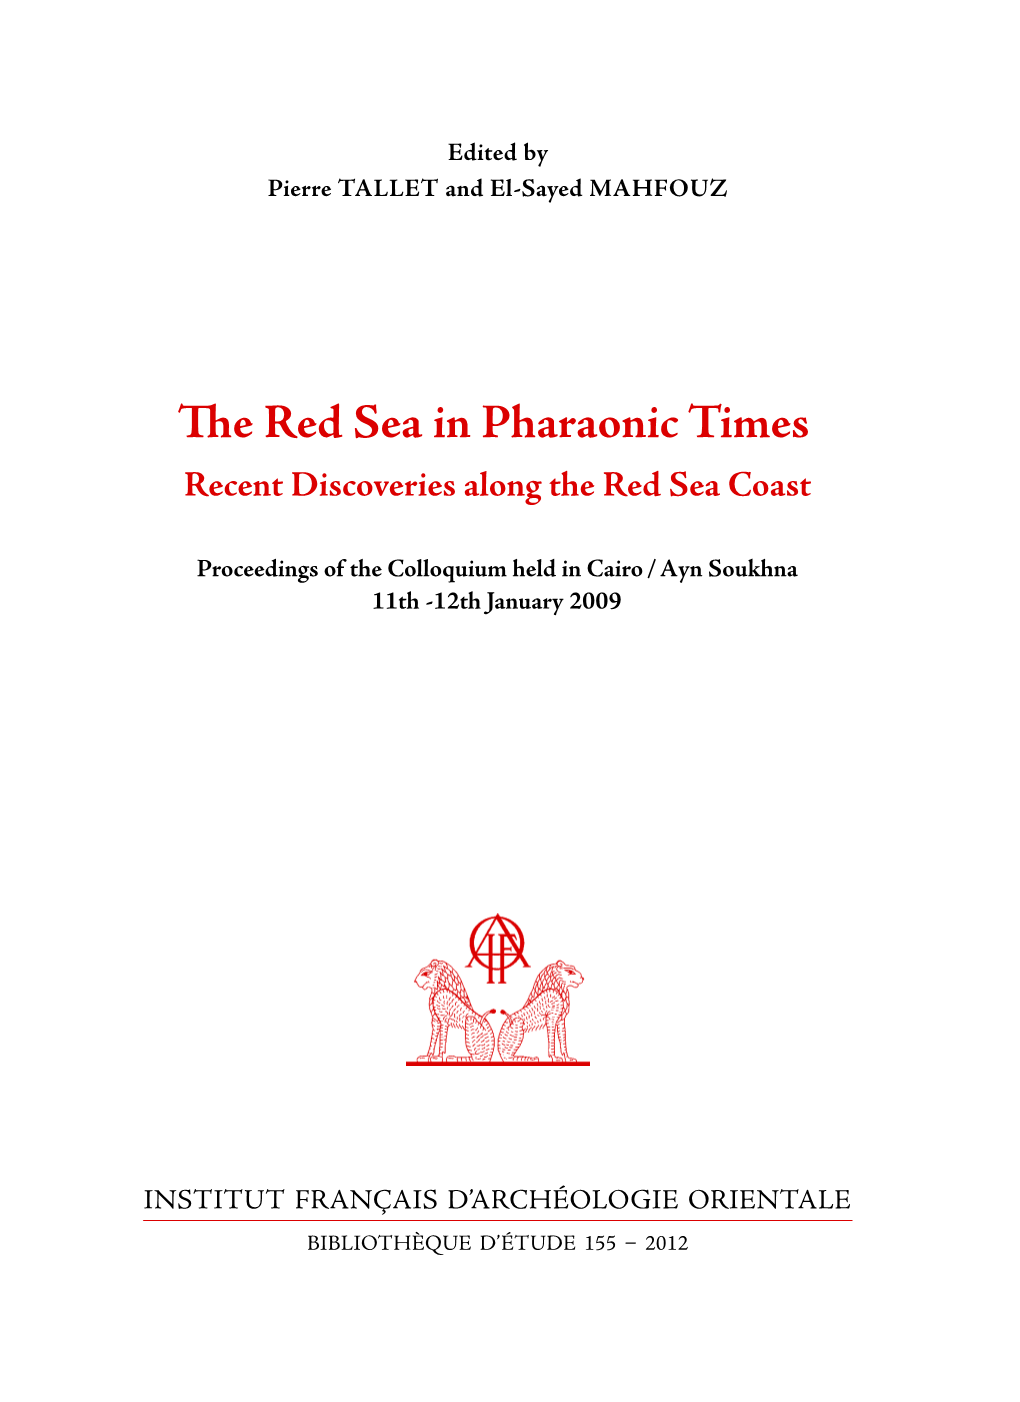 The Red Sea in Pharaonic Times Recent Discoveries Along the Red Sea Coast